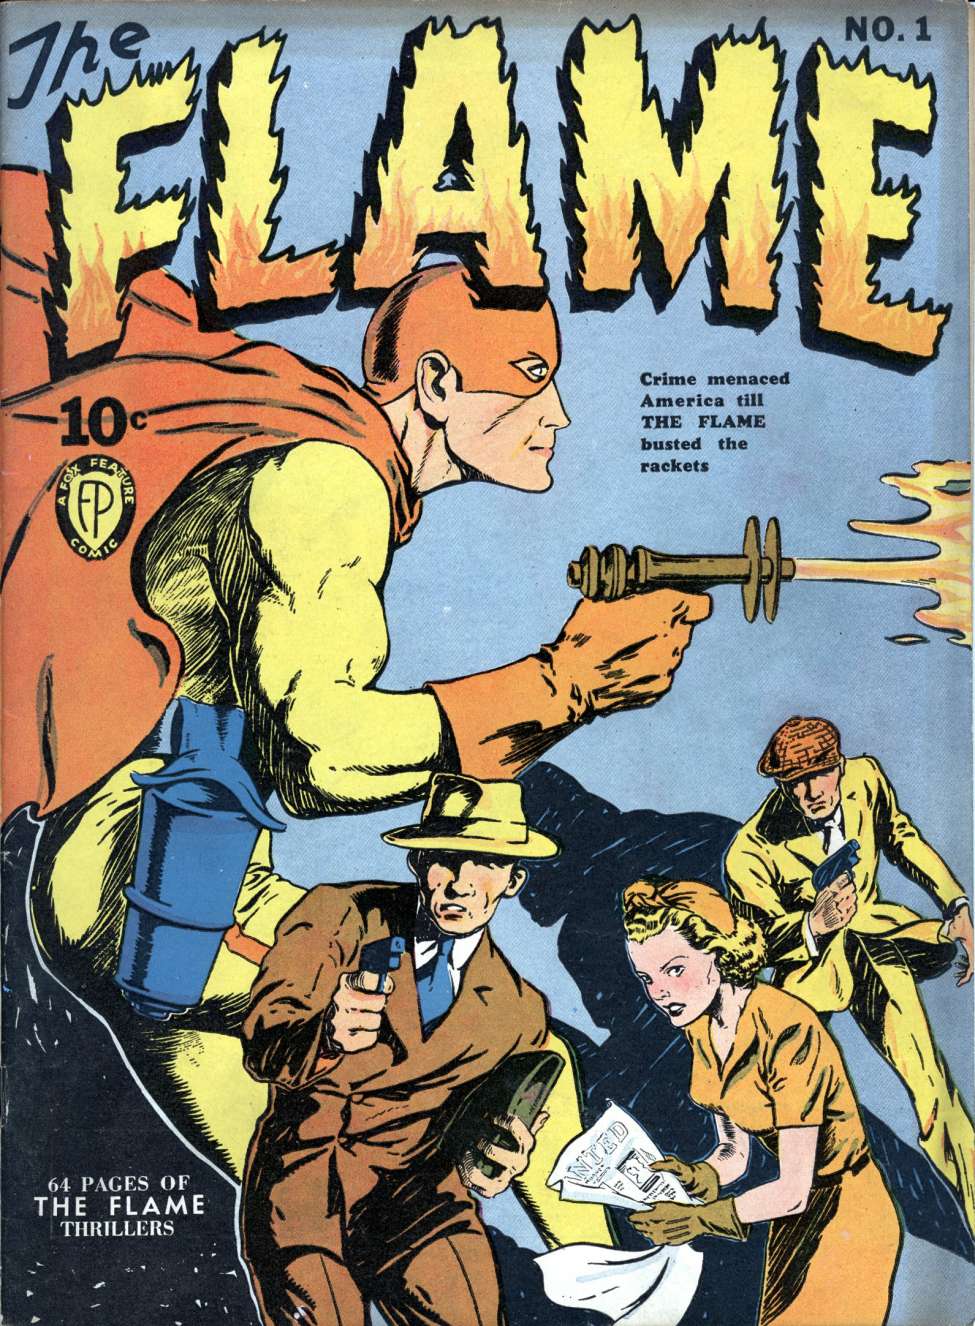 The Flame #1 by Fox